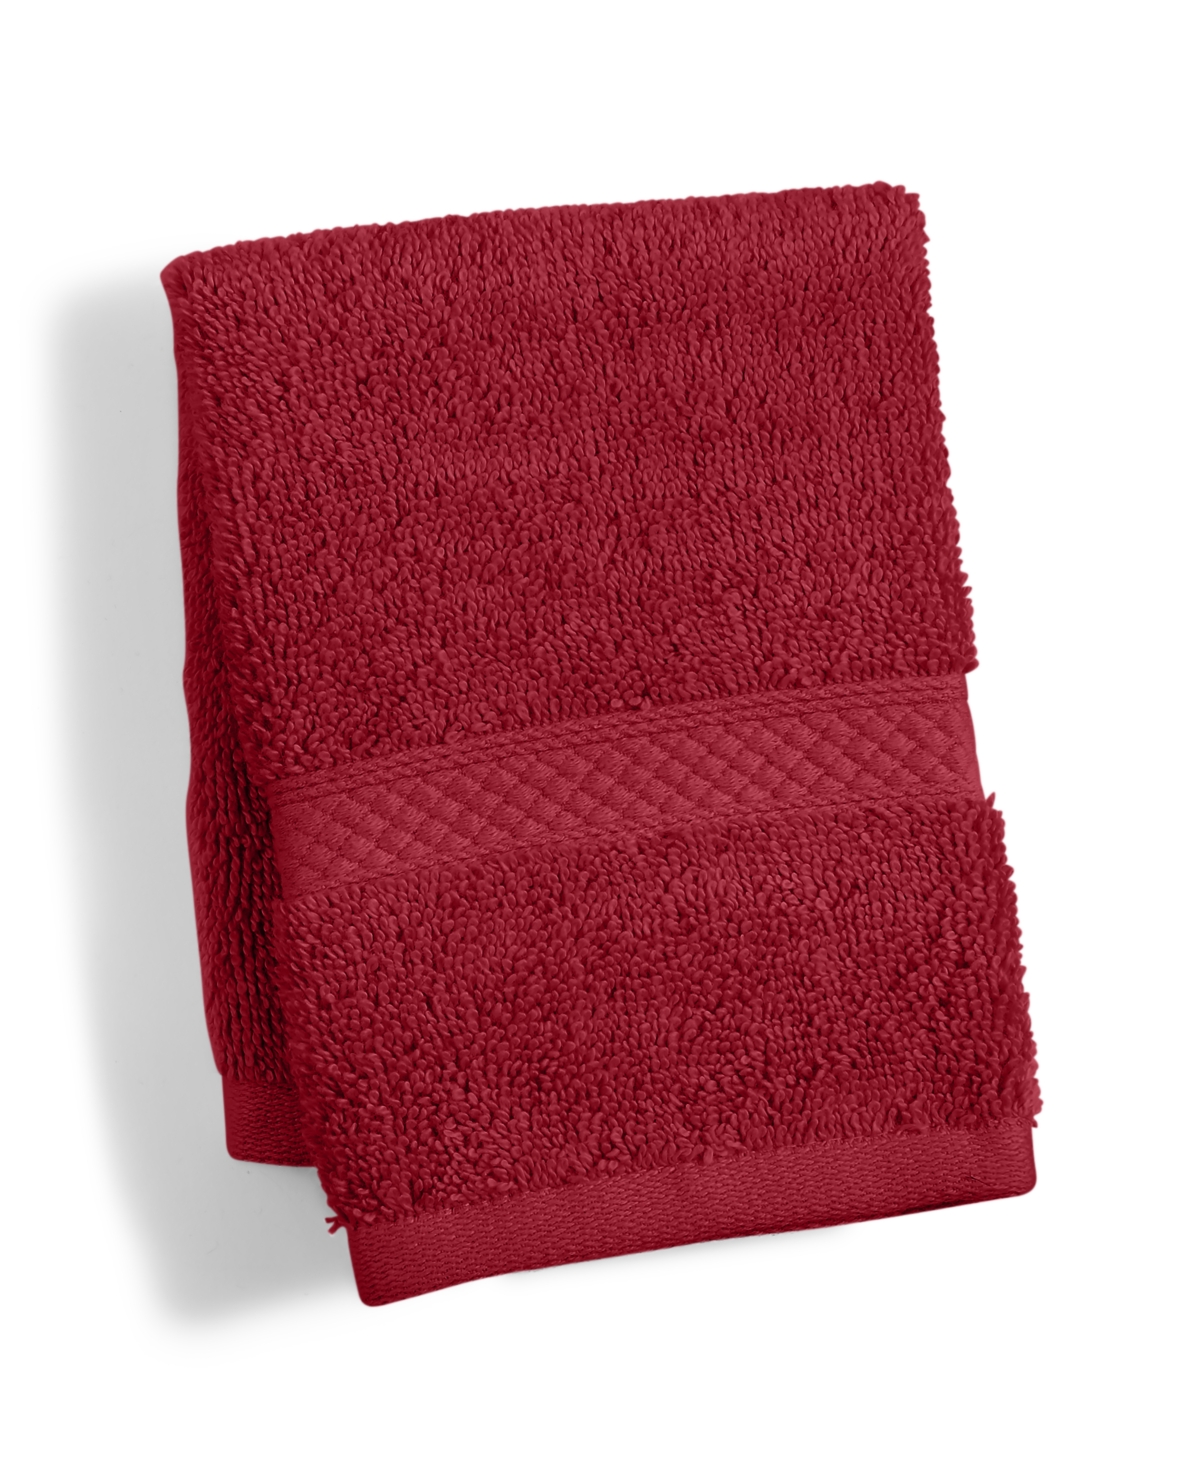 Charter Club Elite Hygrocotton Washcloth, 13" X 13", Created For Macy's In Red Currant